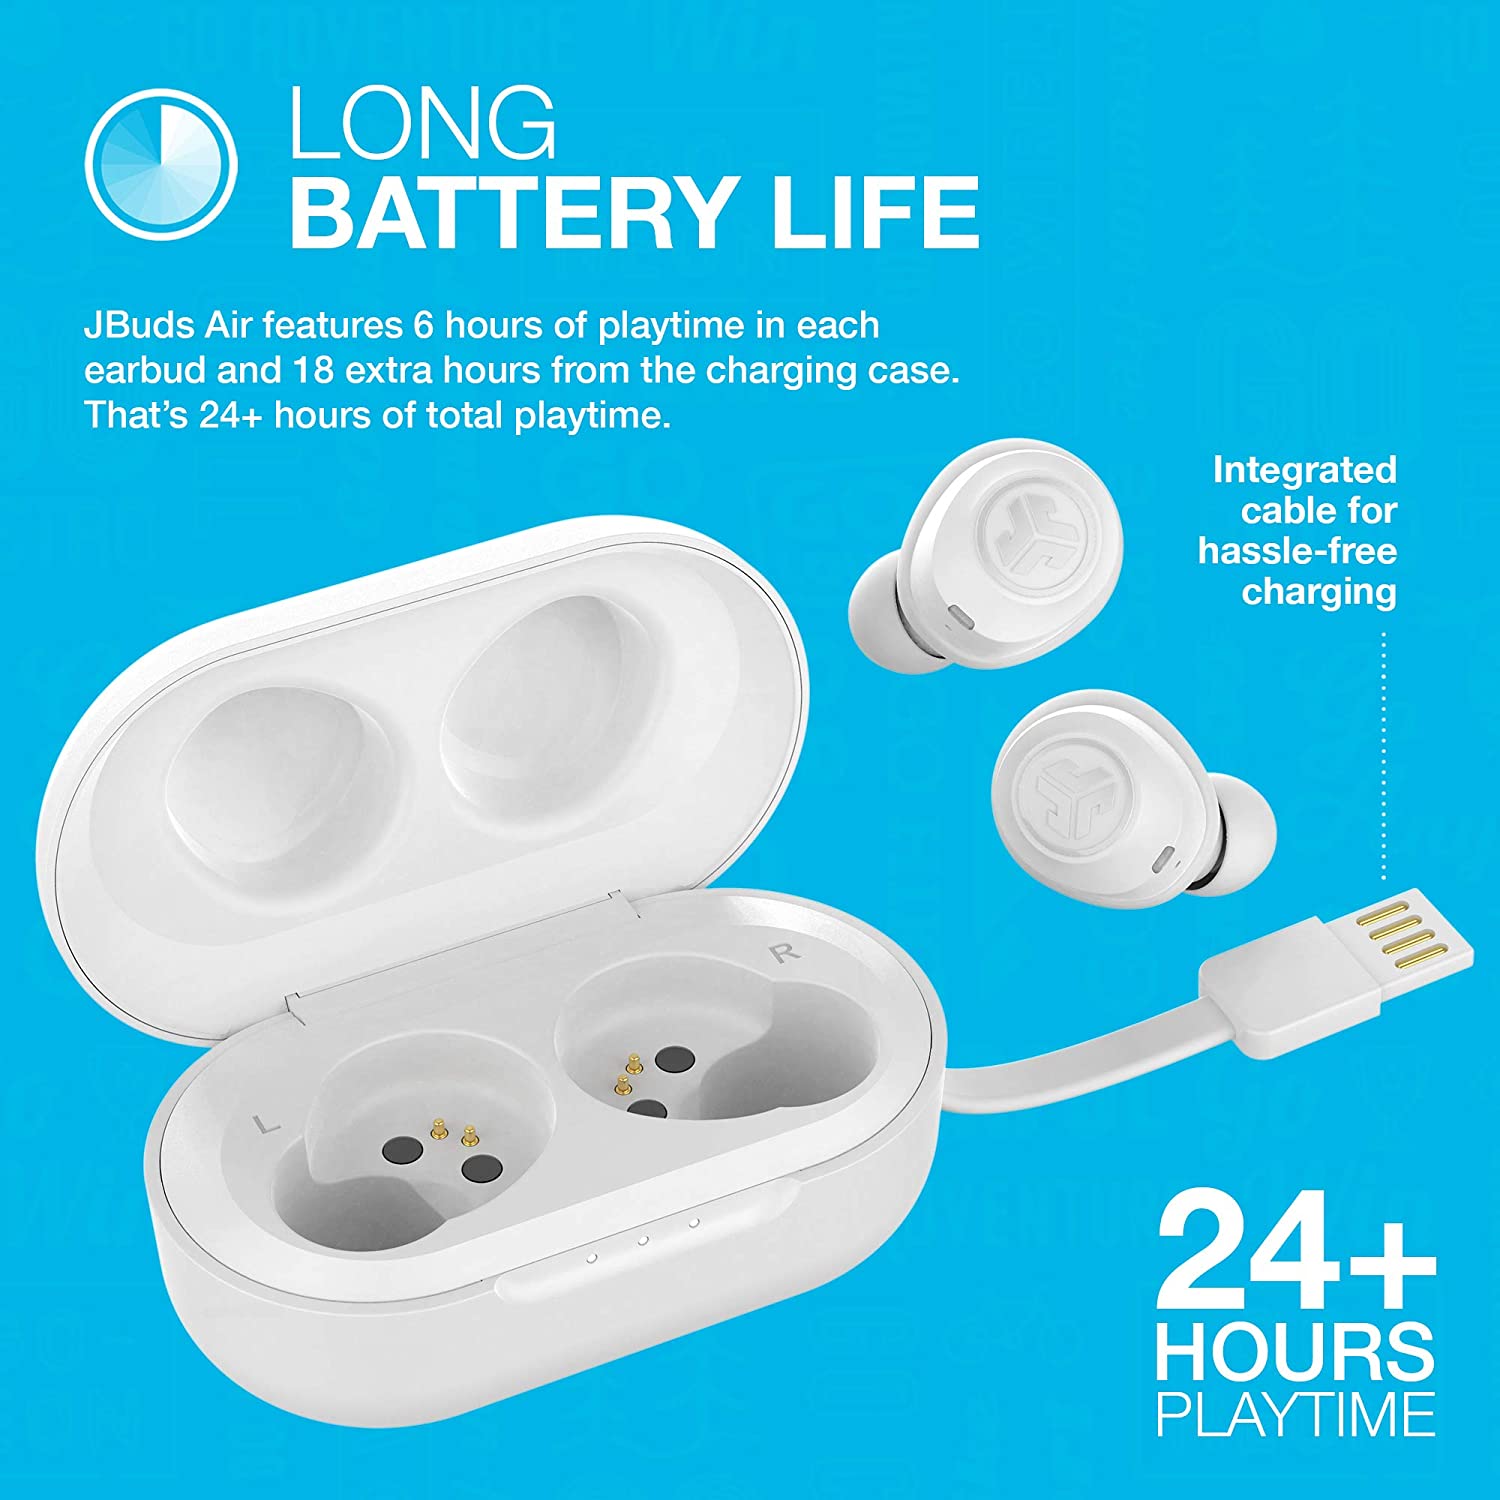 JLab JBuds Air True Wireless Signature Bluetooth Earbuds with Charging Case White Bluetooth 5.0 - Smart Tech Shopping